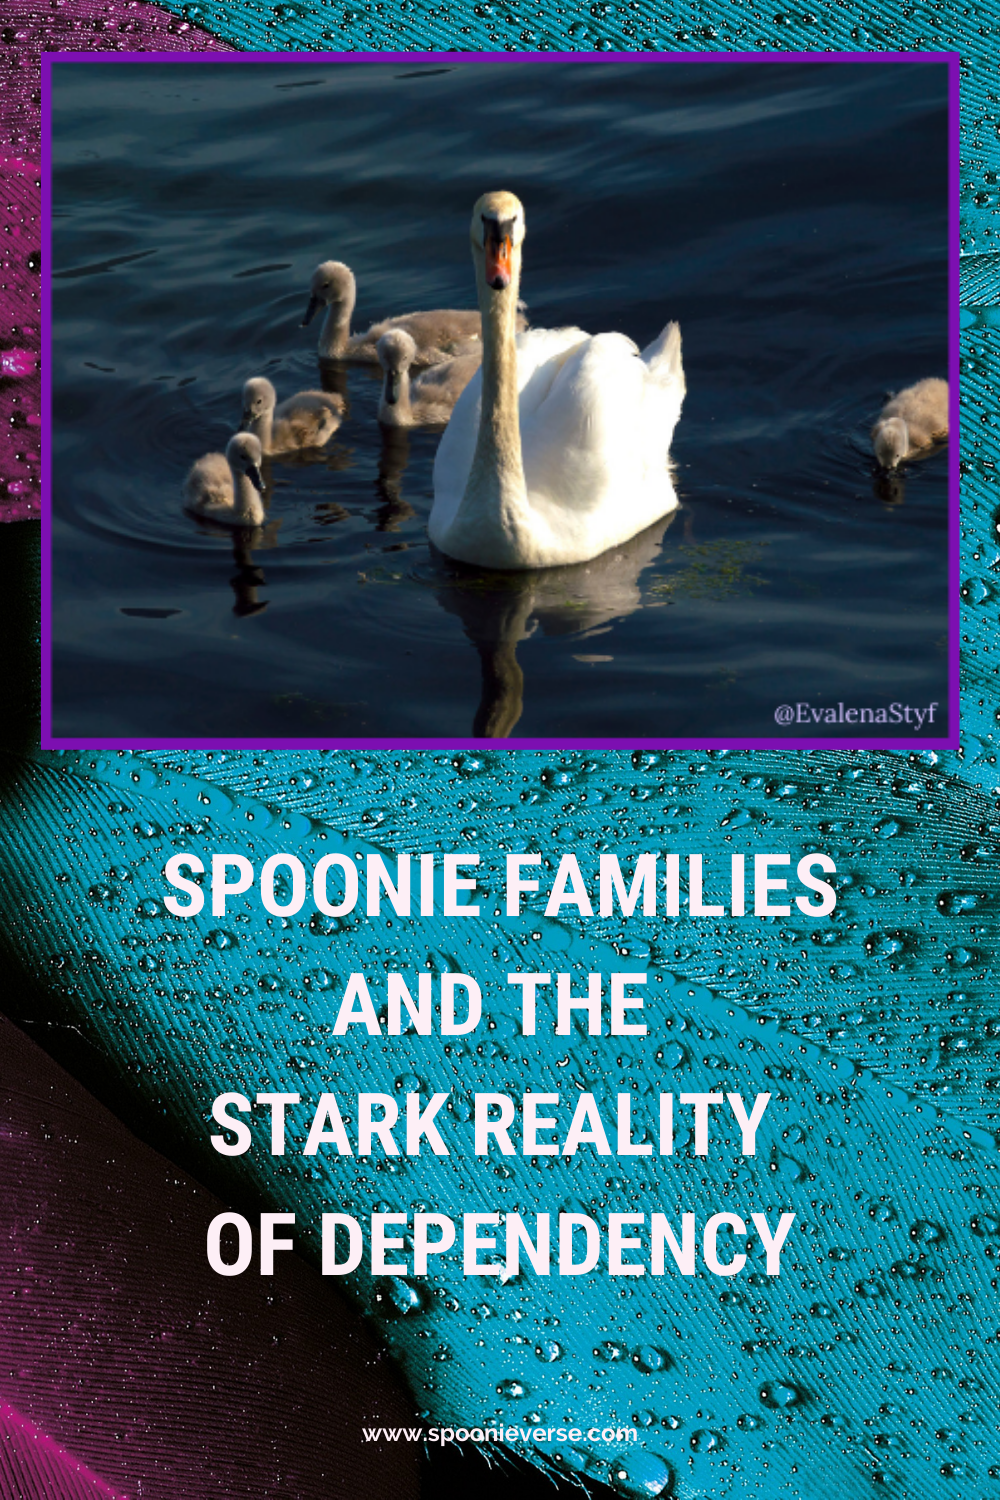 Spoonie families and the stark reality of dependence